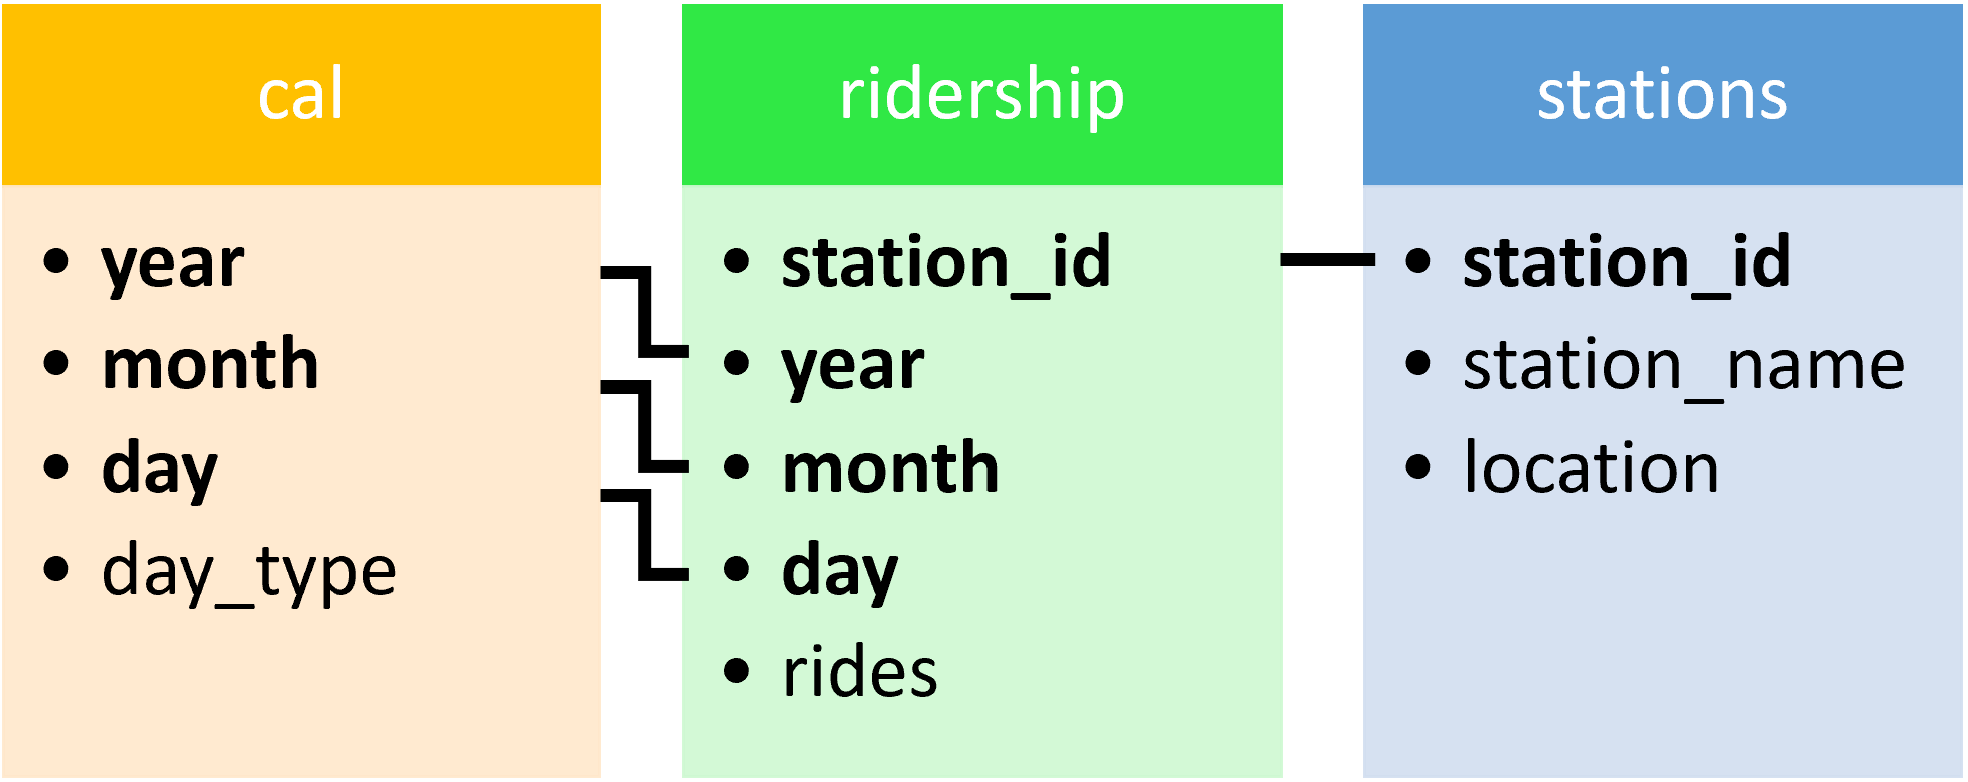 Table diagram. The cal table relates to ridership via year, month, and day. The ridership table relates to the stations table via station_id.